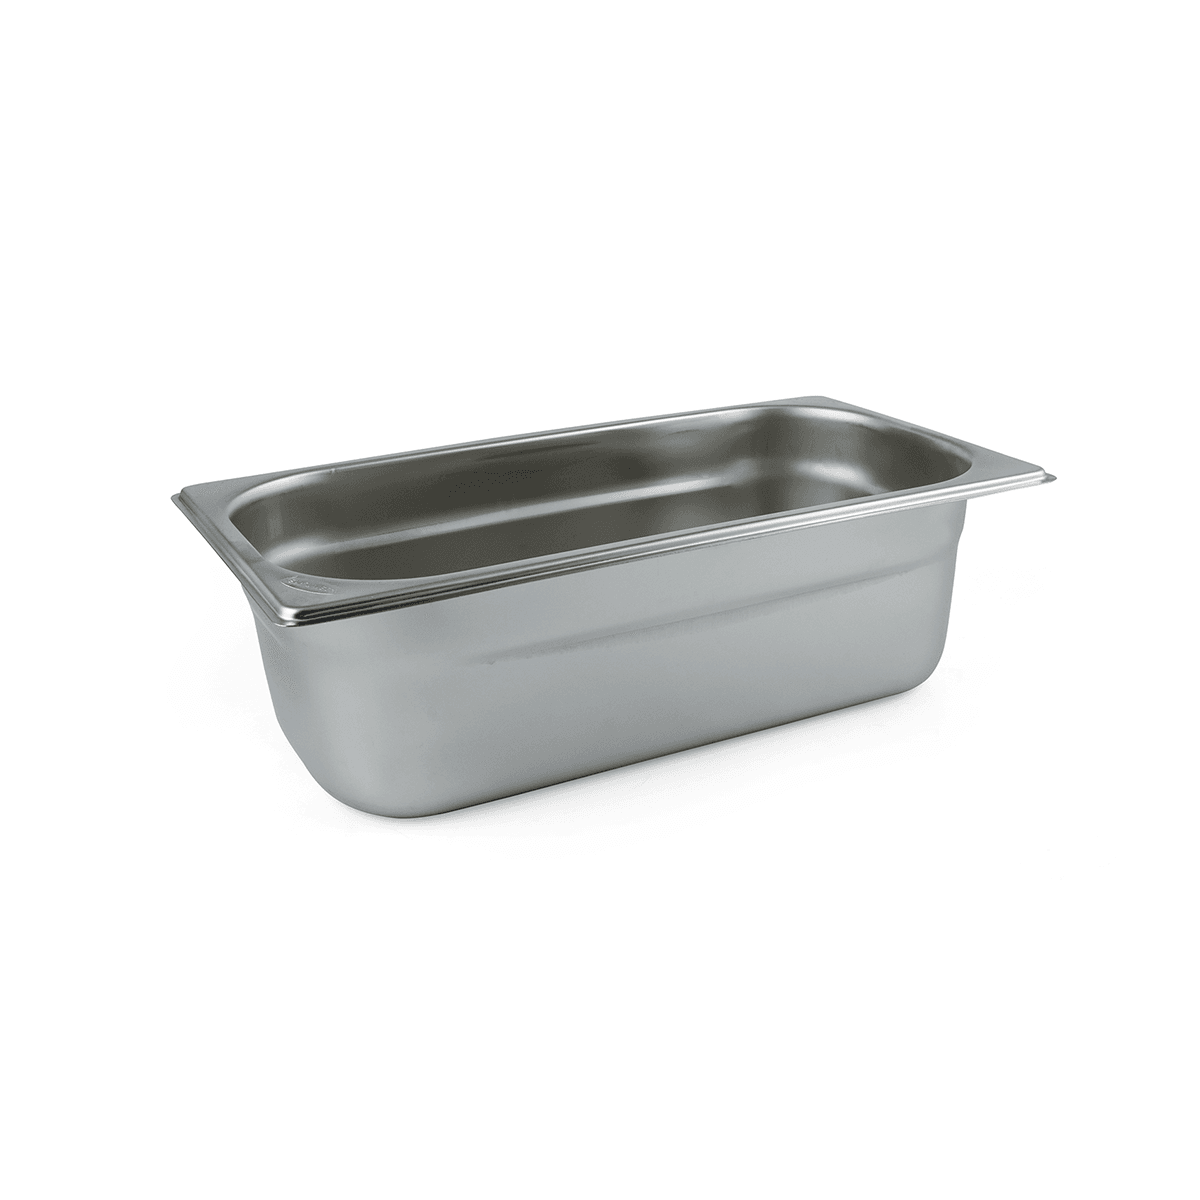 Kayalar Stainless Steel Gastronorm Container GN 1/3-100 mm Silver Stainless Steel